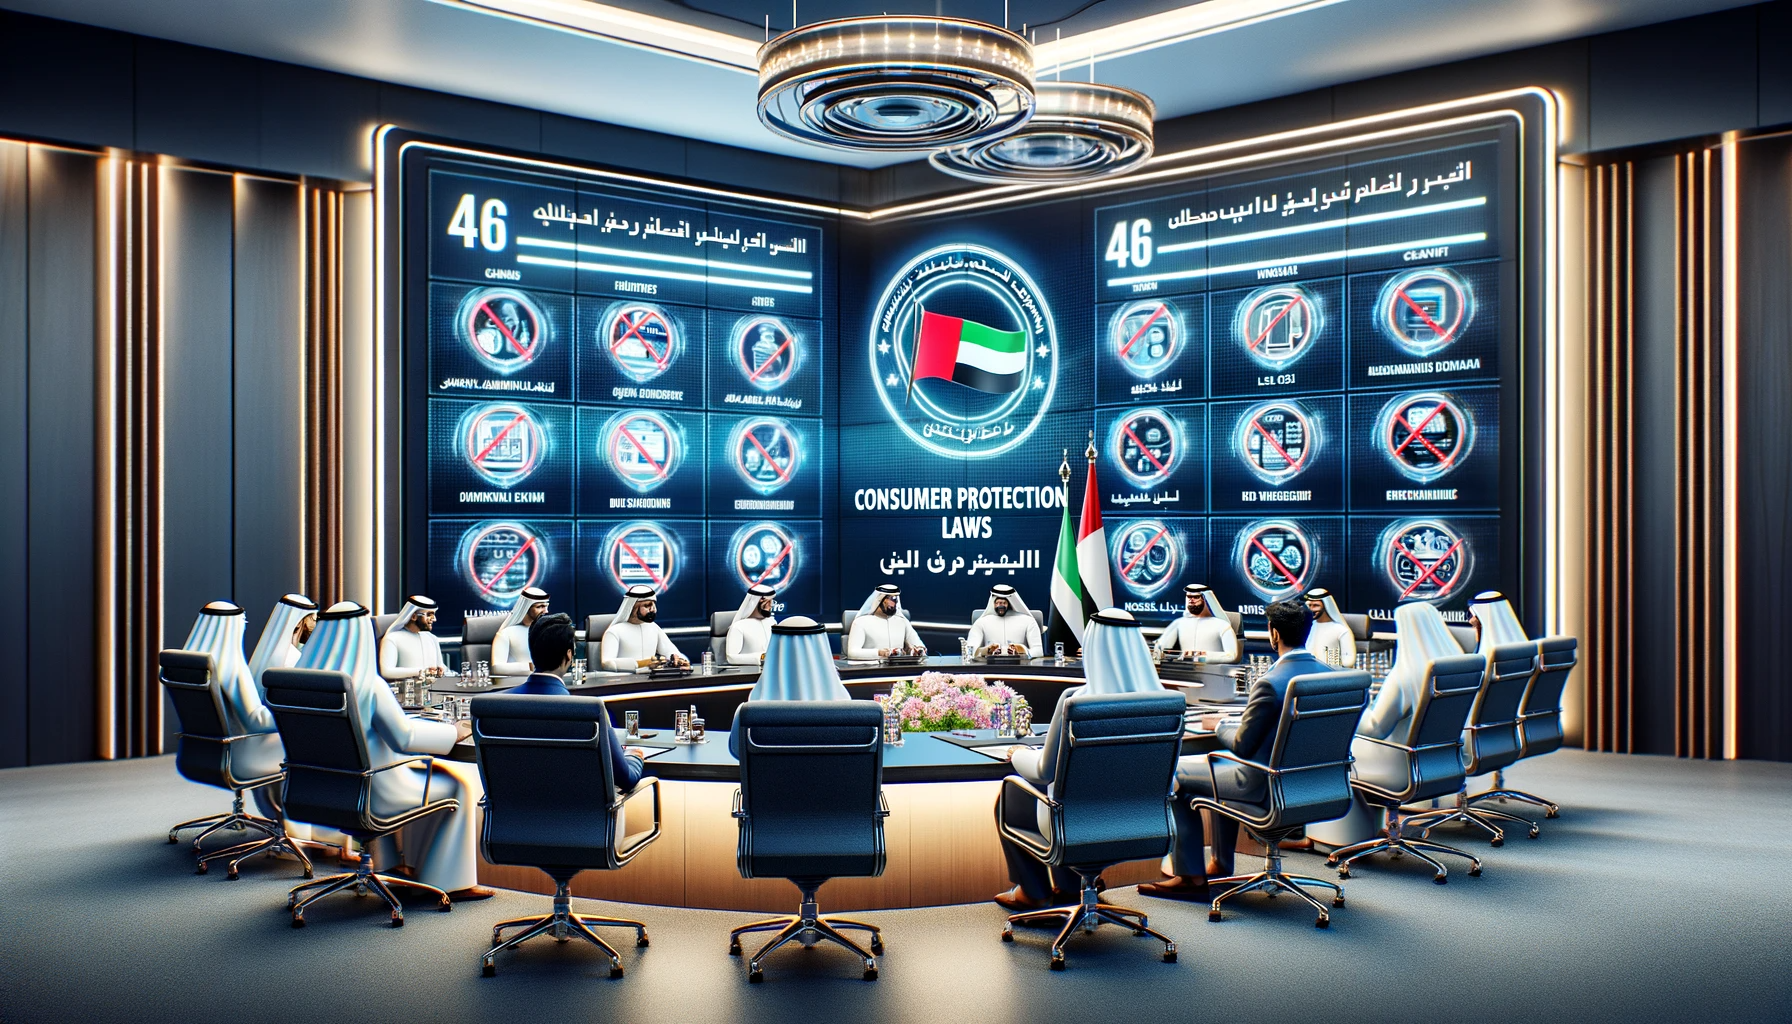 DALL·E 2024 01 15 14.55.01 A modern conference room setting with UAE government officials discussing consumer protection laws. The room is equipped with a large screen displayin